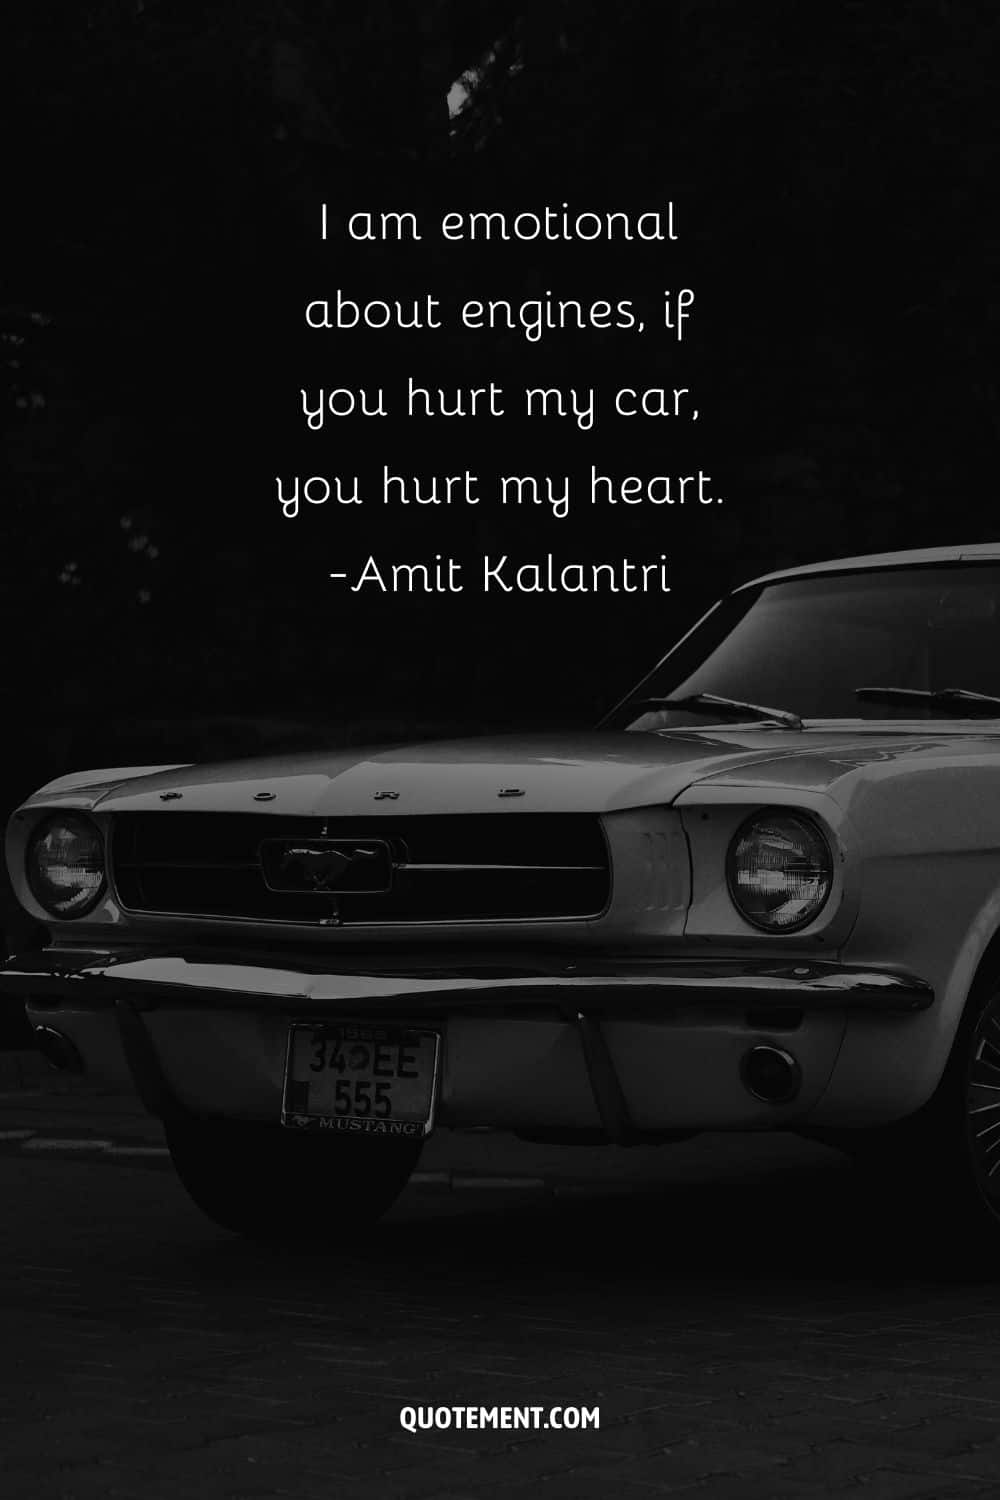 “I am emotional about engines, if you hurt my car, you hurt my heart.” ― Amit Kalantri, Wealth of Words